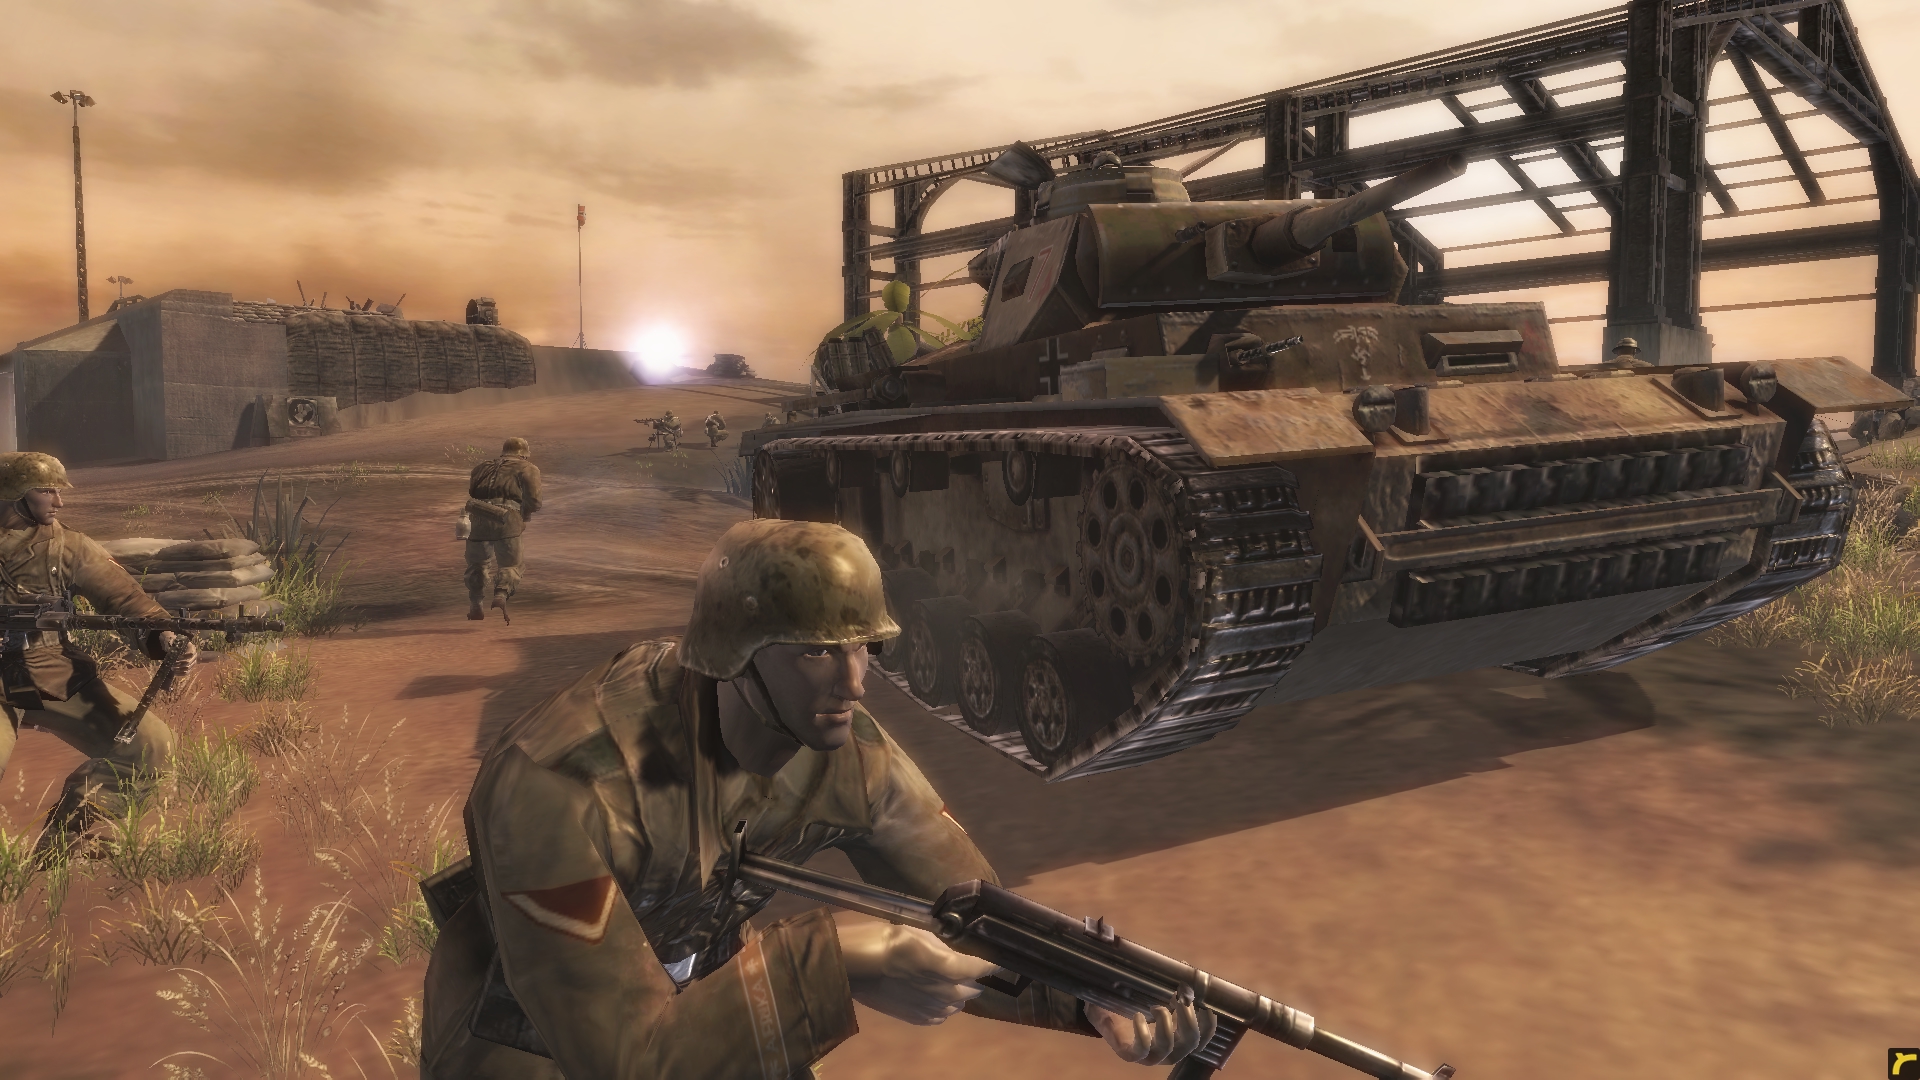 company of heroes new steam version